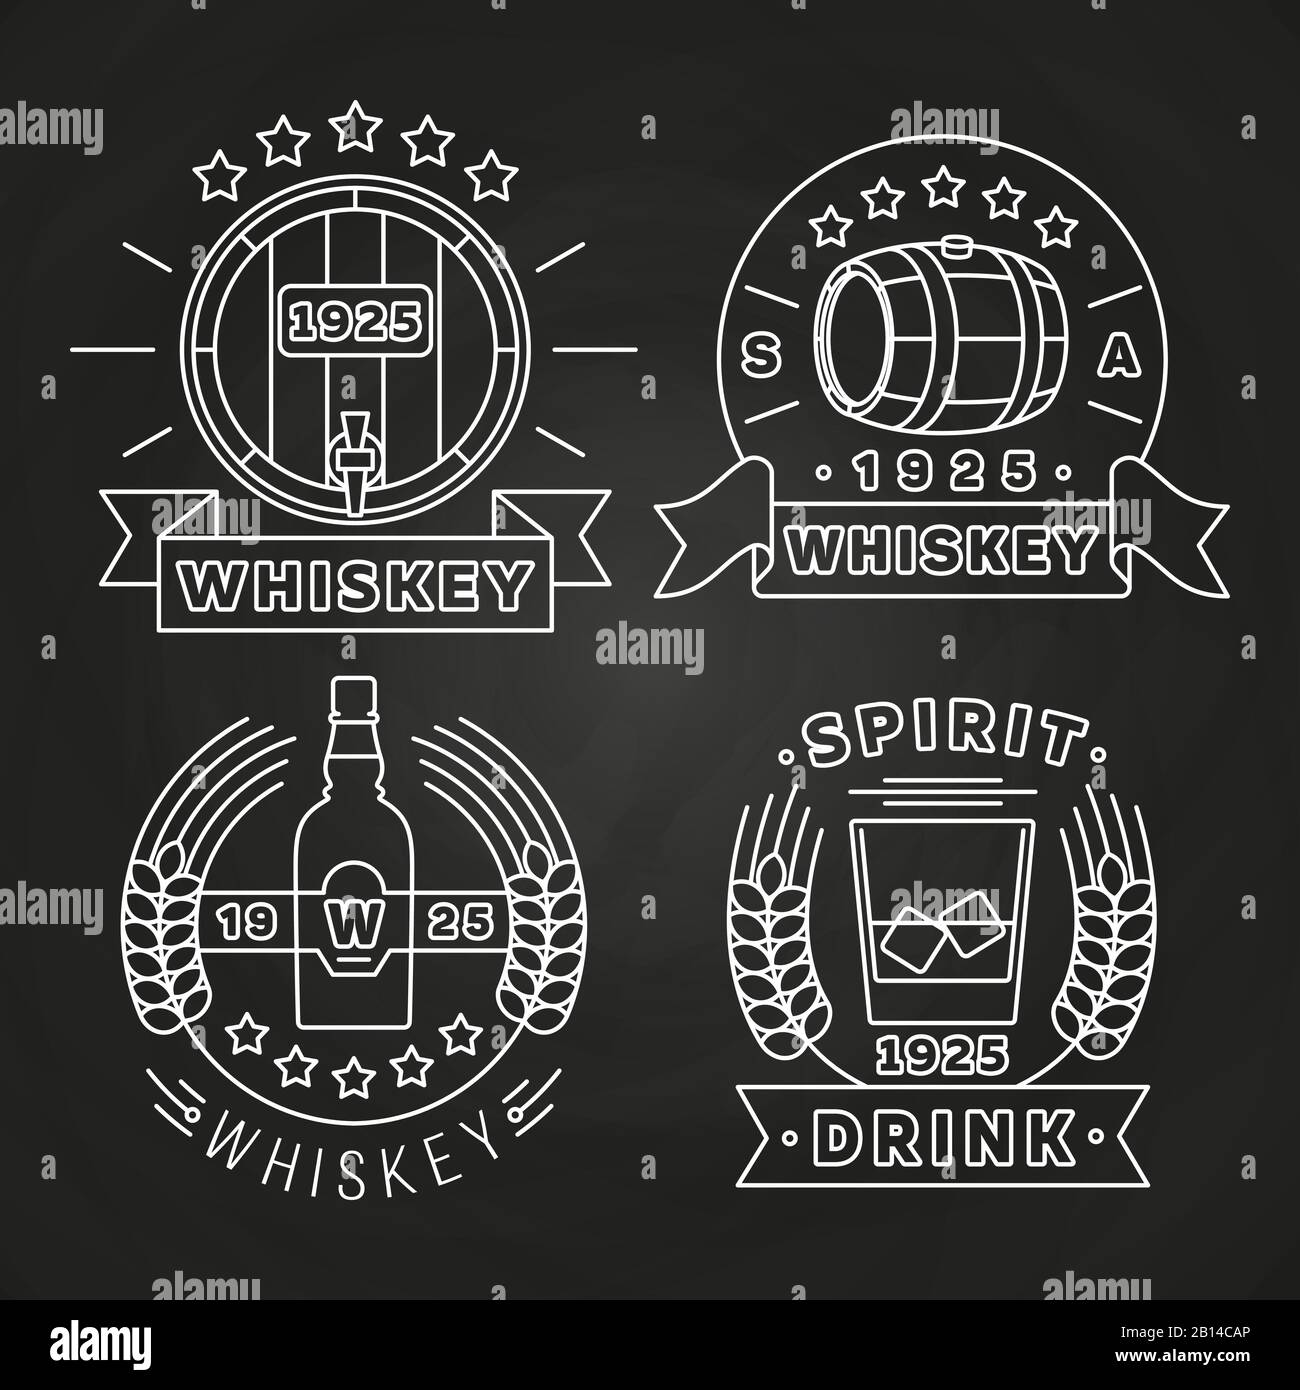 Whiskey and drink labels collection on chalkboard. Alcohol label, vector illustration Stock Vector